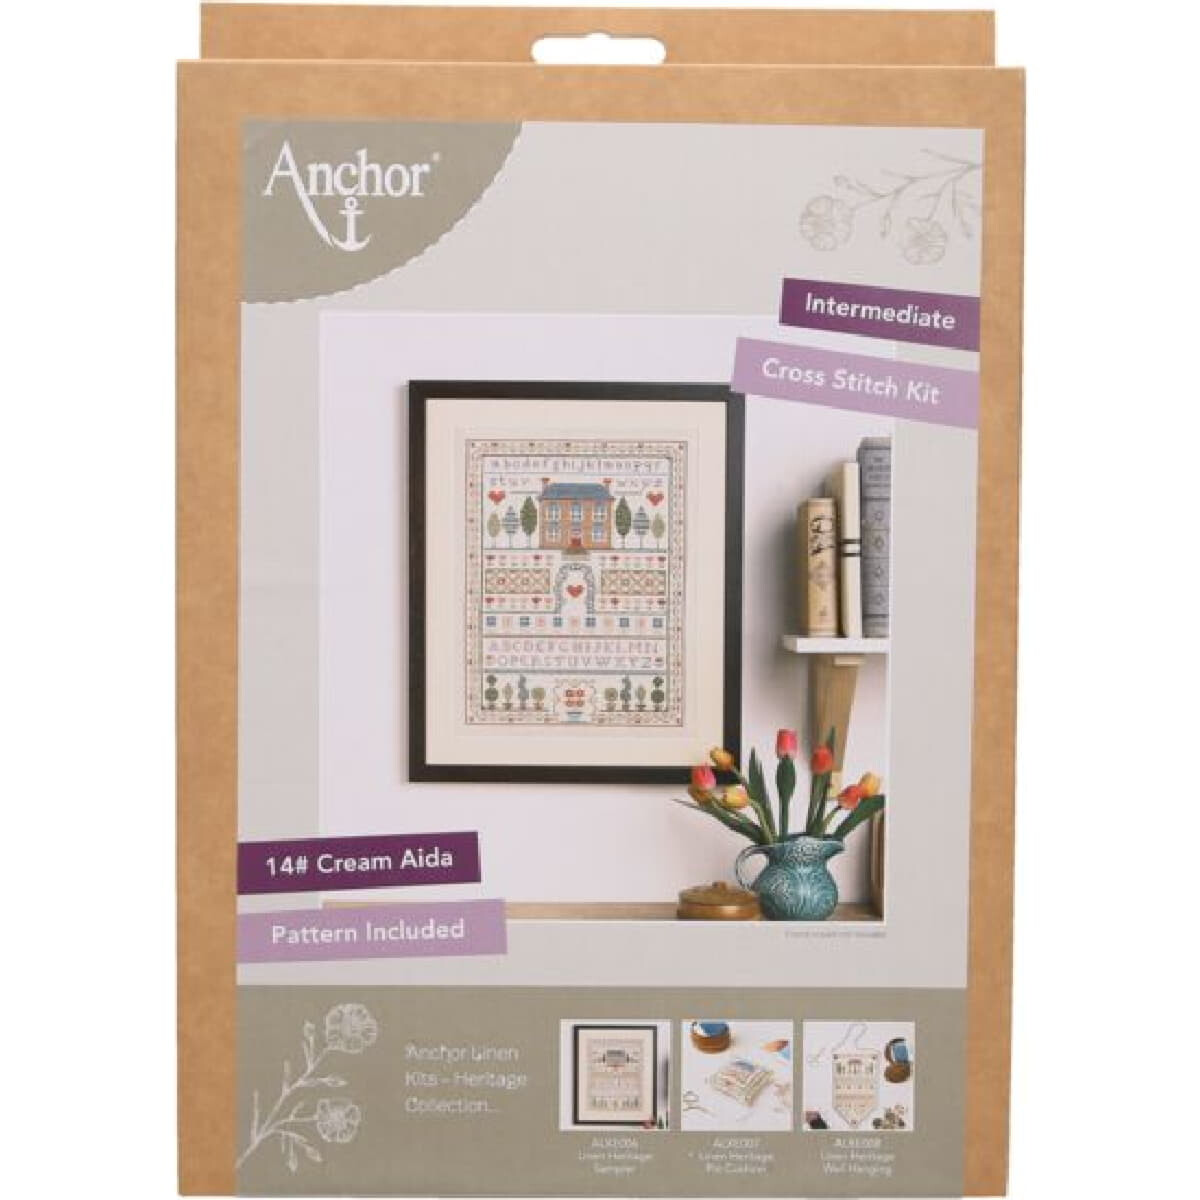 Anchor counted cross stitch kit "Linen Heritage...